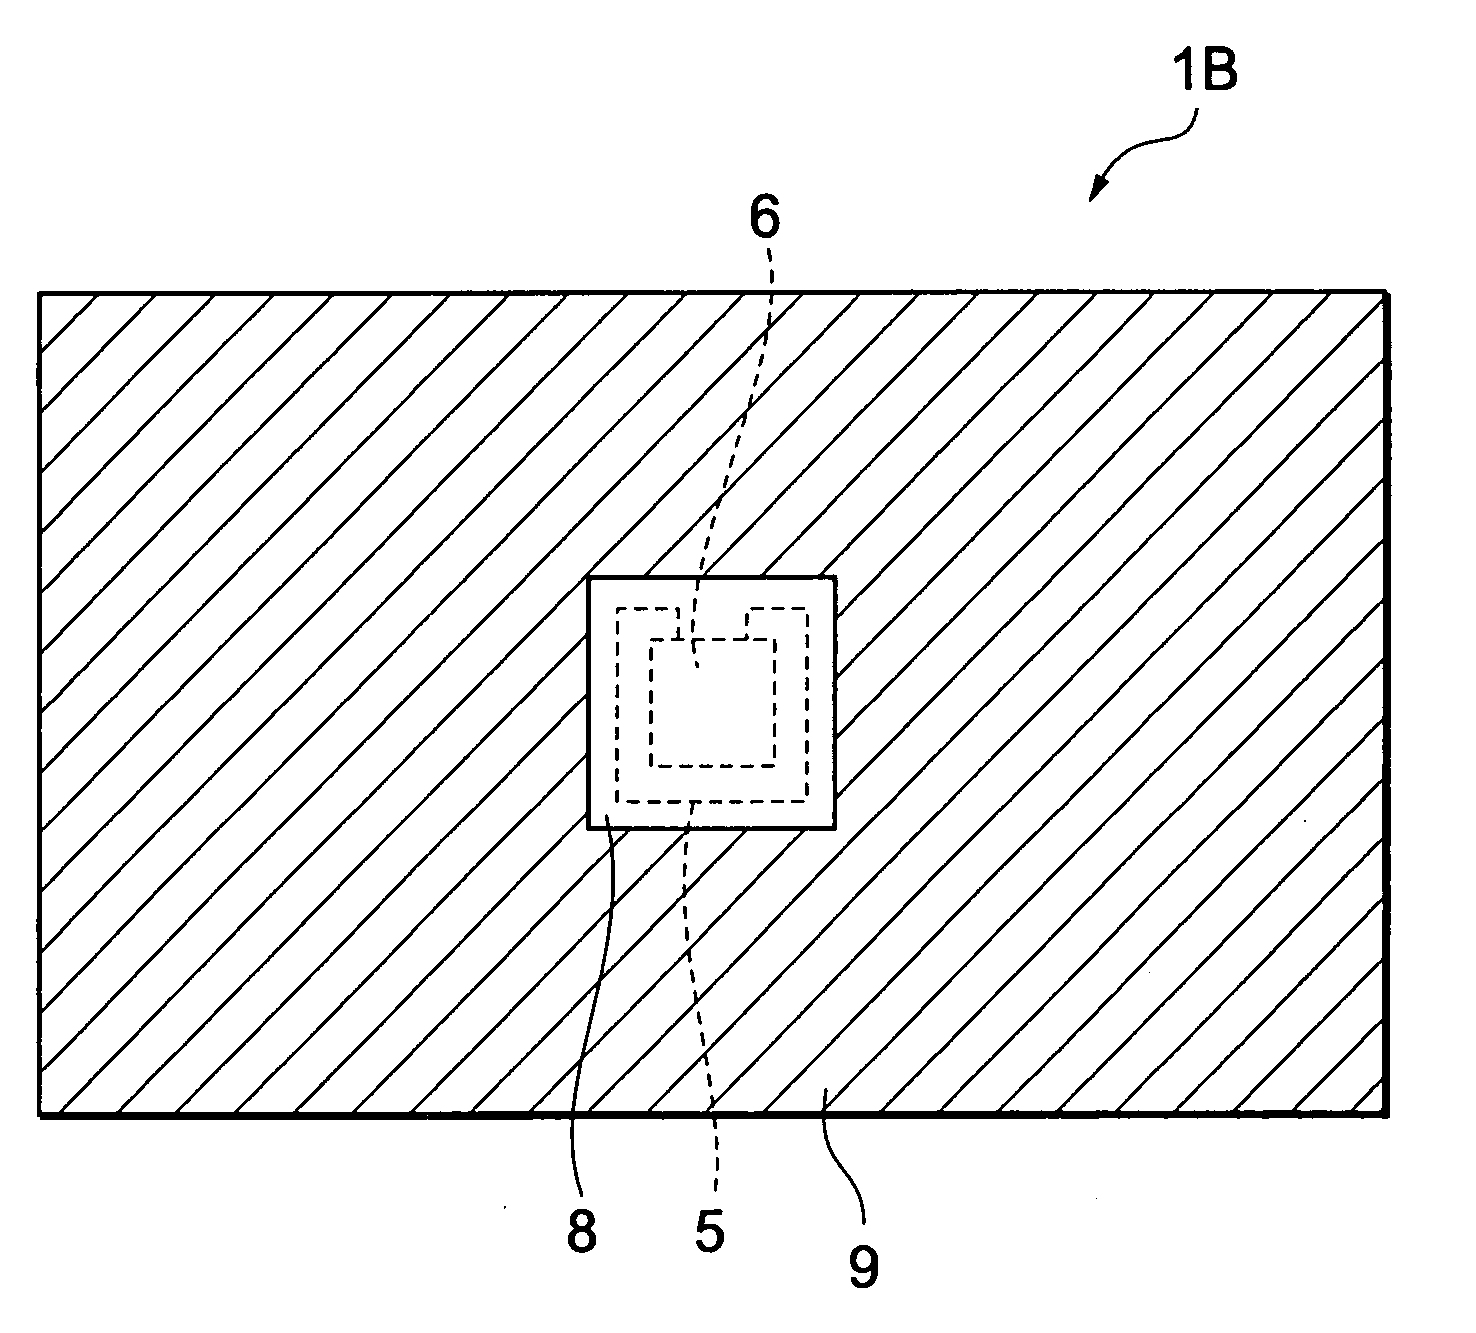 Antenna-containing substrate